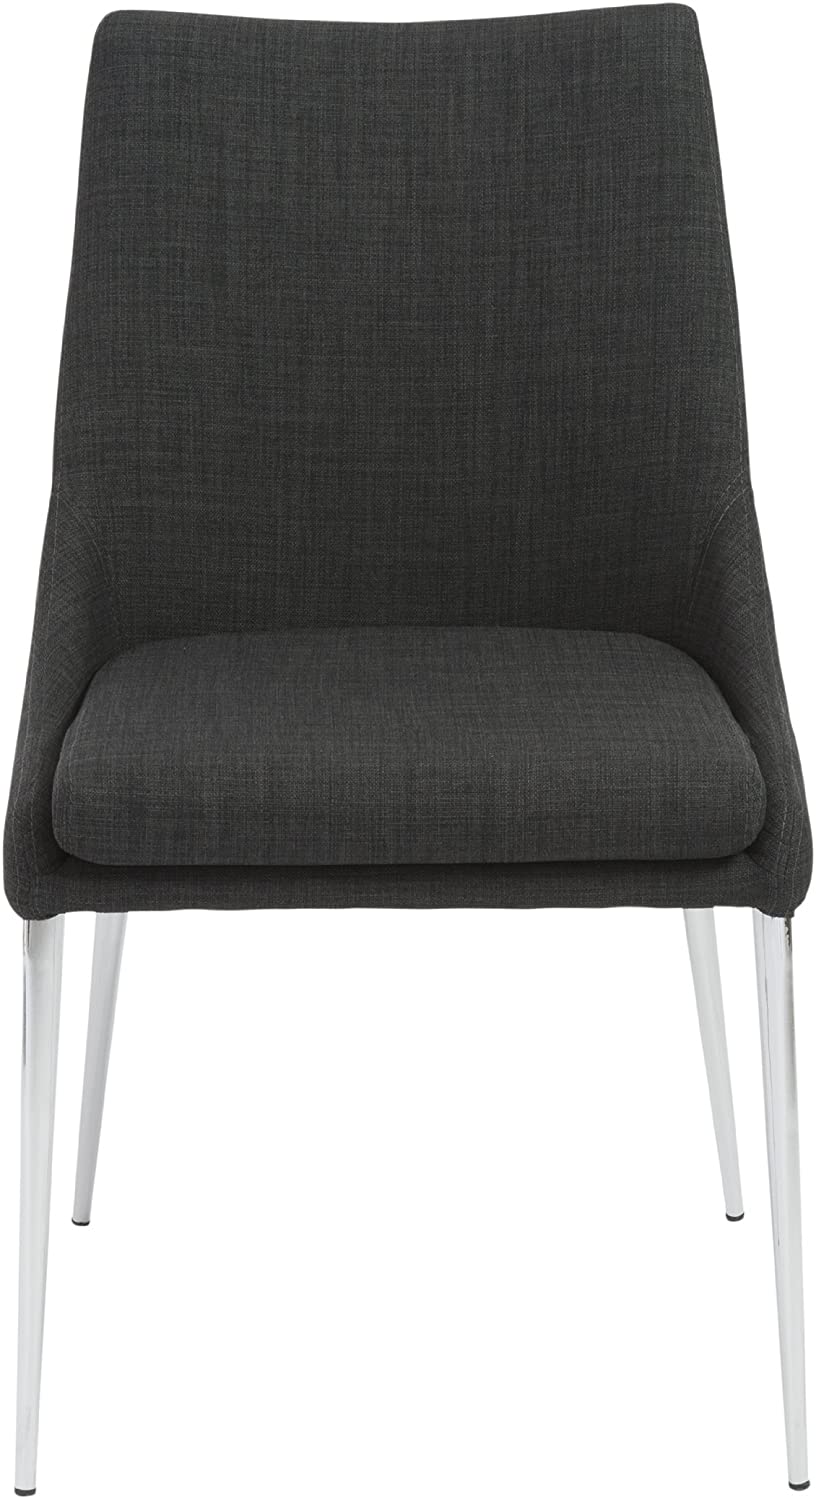 B00K2MT8YA Euro Style Tarnana Upholstered Side Dining Chair, Set of 2, Charcoal Fabric with Chrome Legs